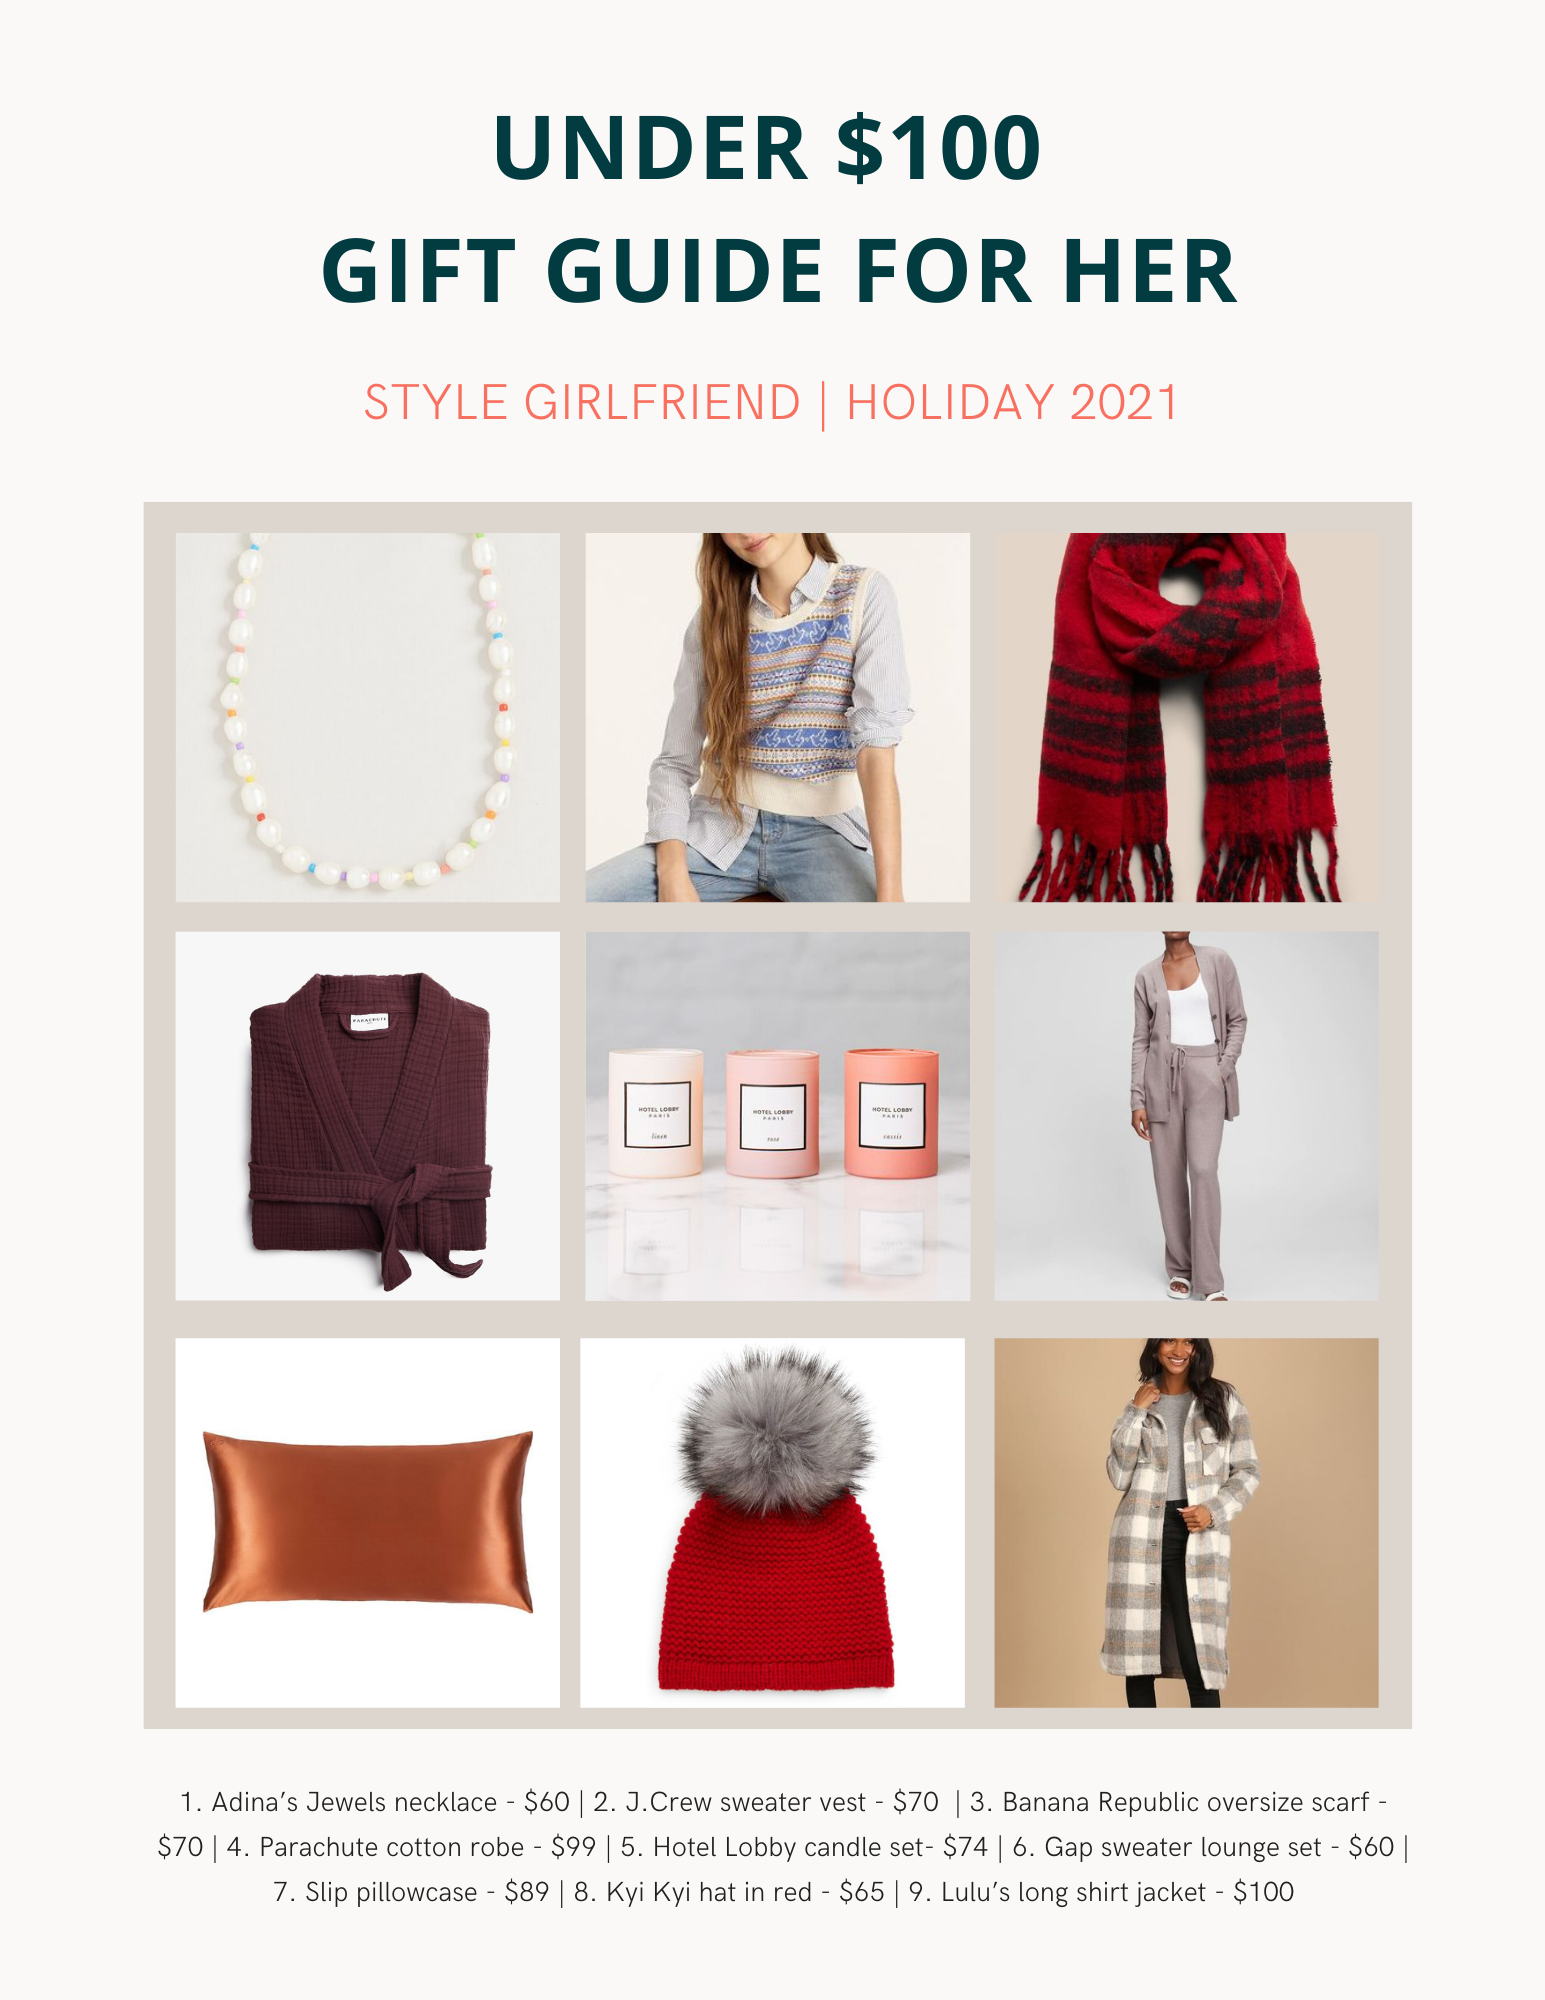 Under $100 gifts for Her gift guide
